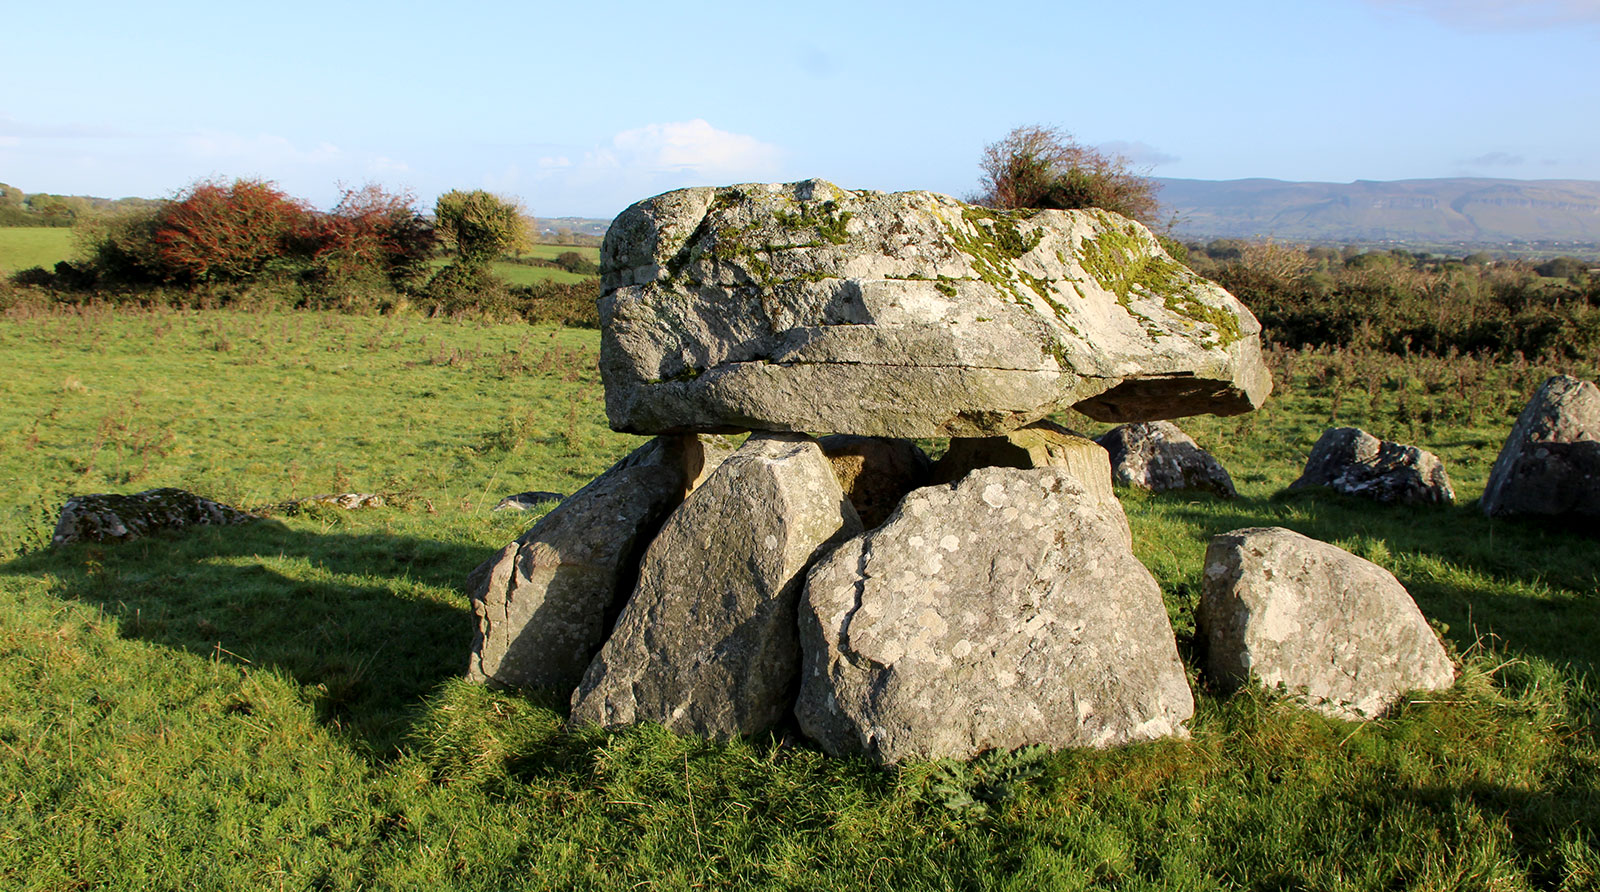 The Kissing Stone, Monument Number 7 at Carrowmore. The Carrowmore circles were long thought to contain the remains of warriors s;ain during the Second Battle of Moytura.